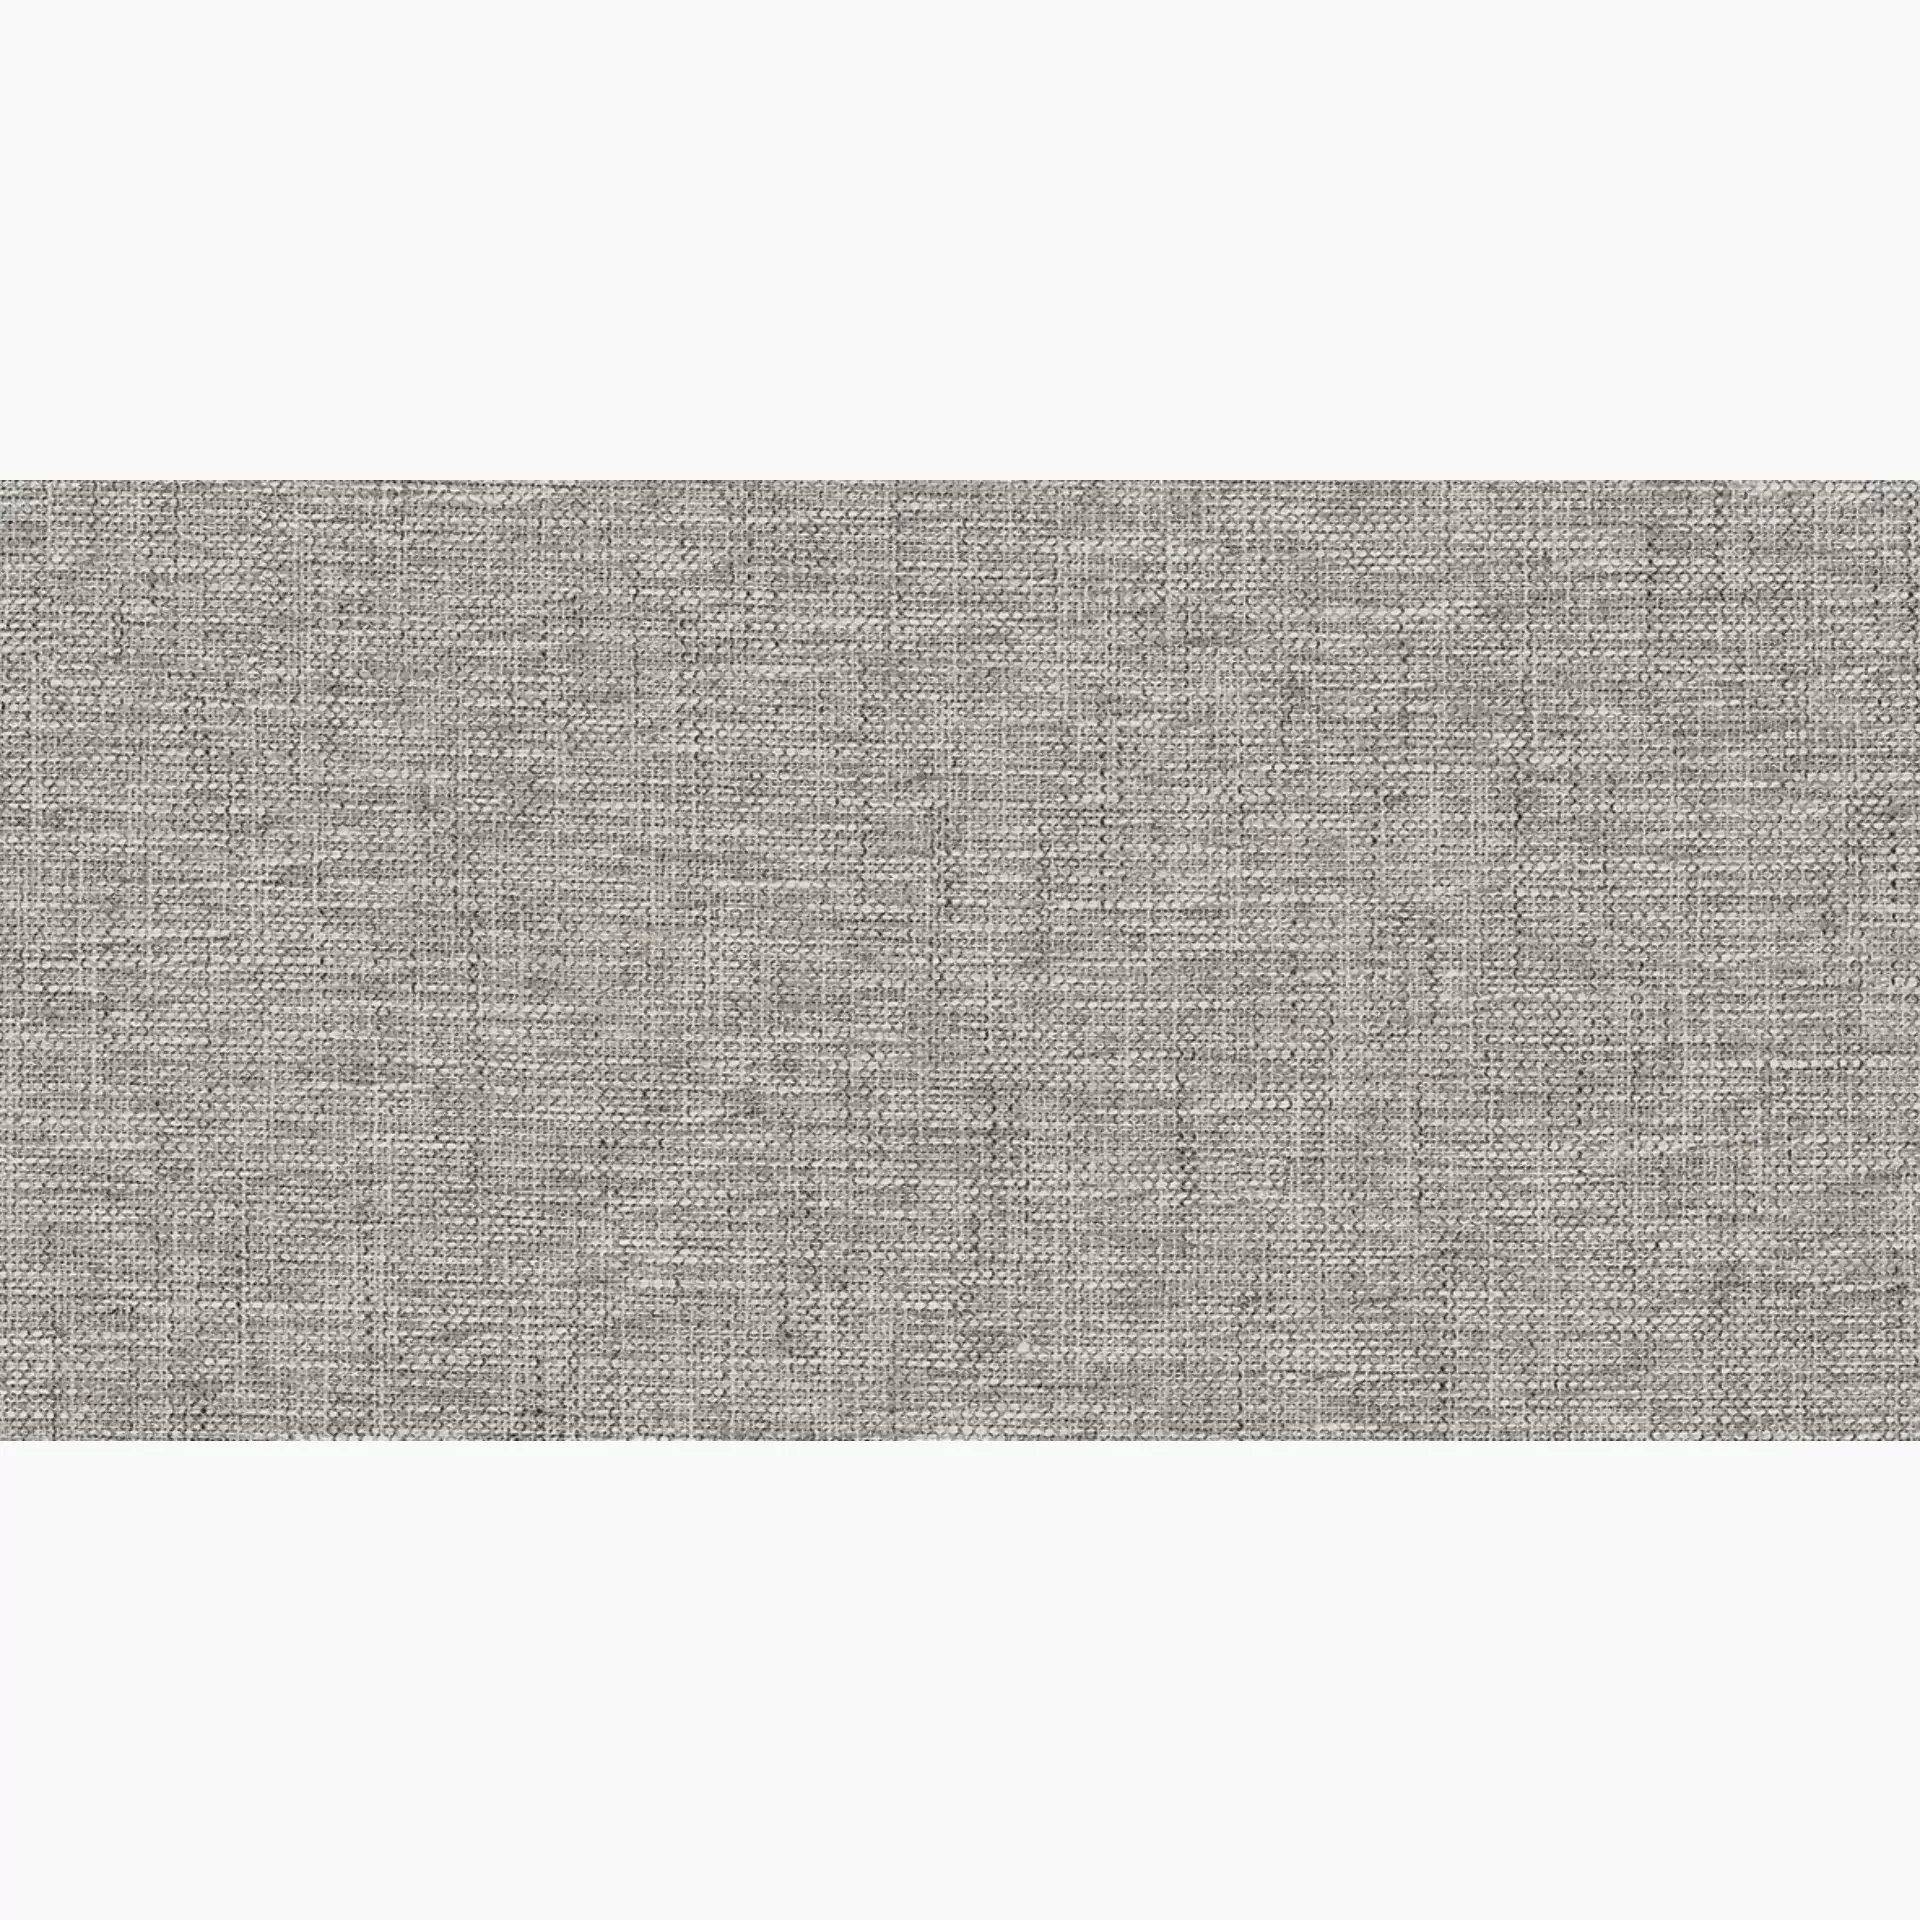 Sant Agostino Fineart Grey Natural CSAFIGR130 30x60cm rectified 10mm